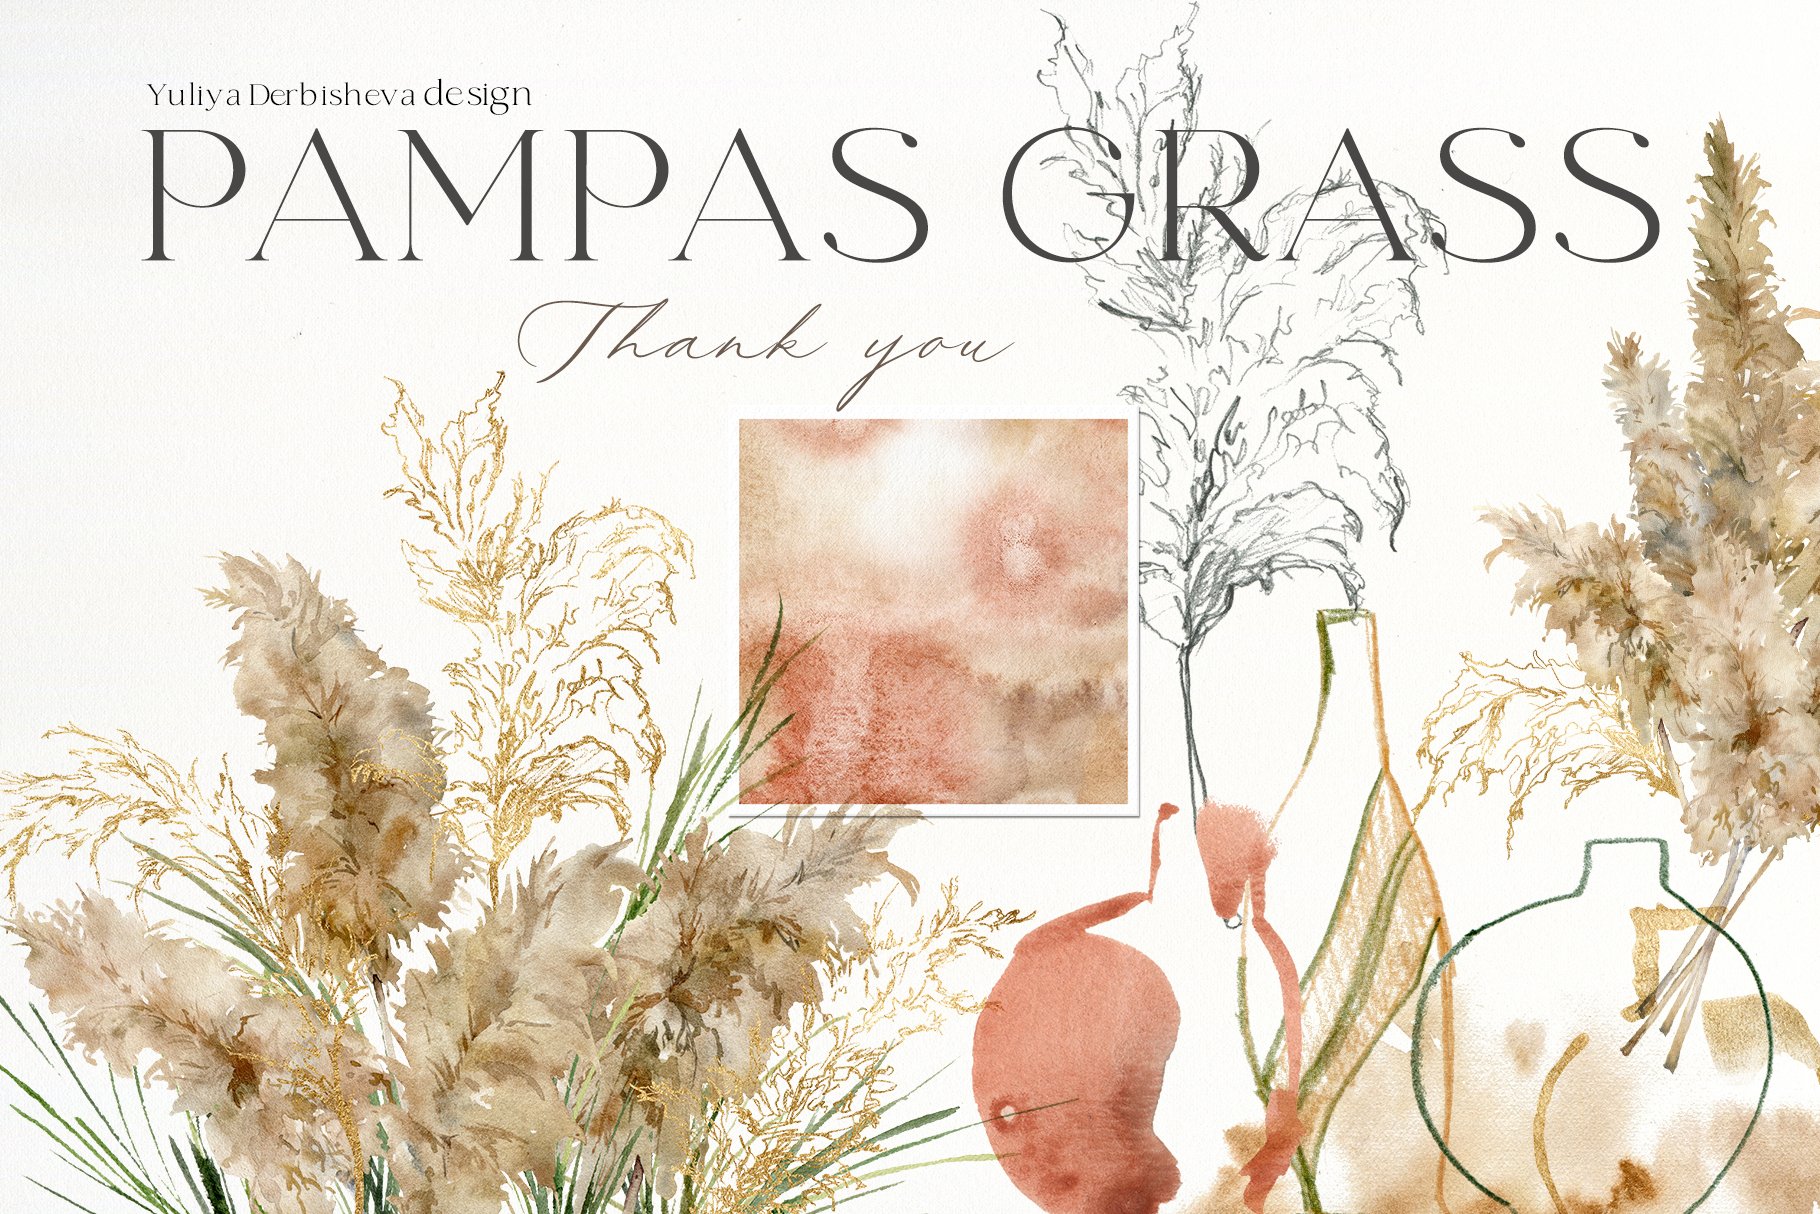 Watercolor painting of pampas's grass.